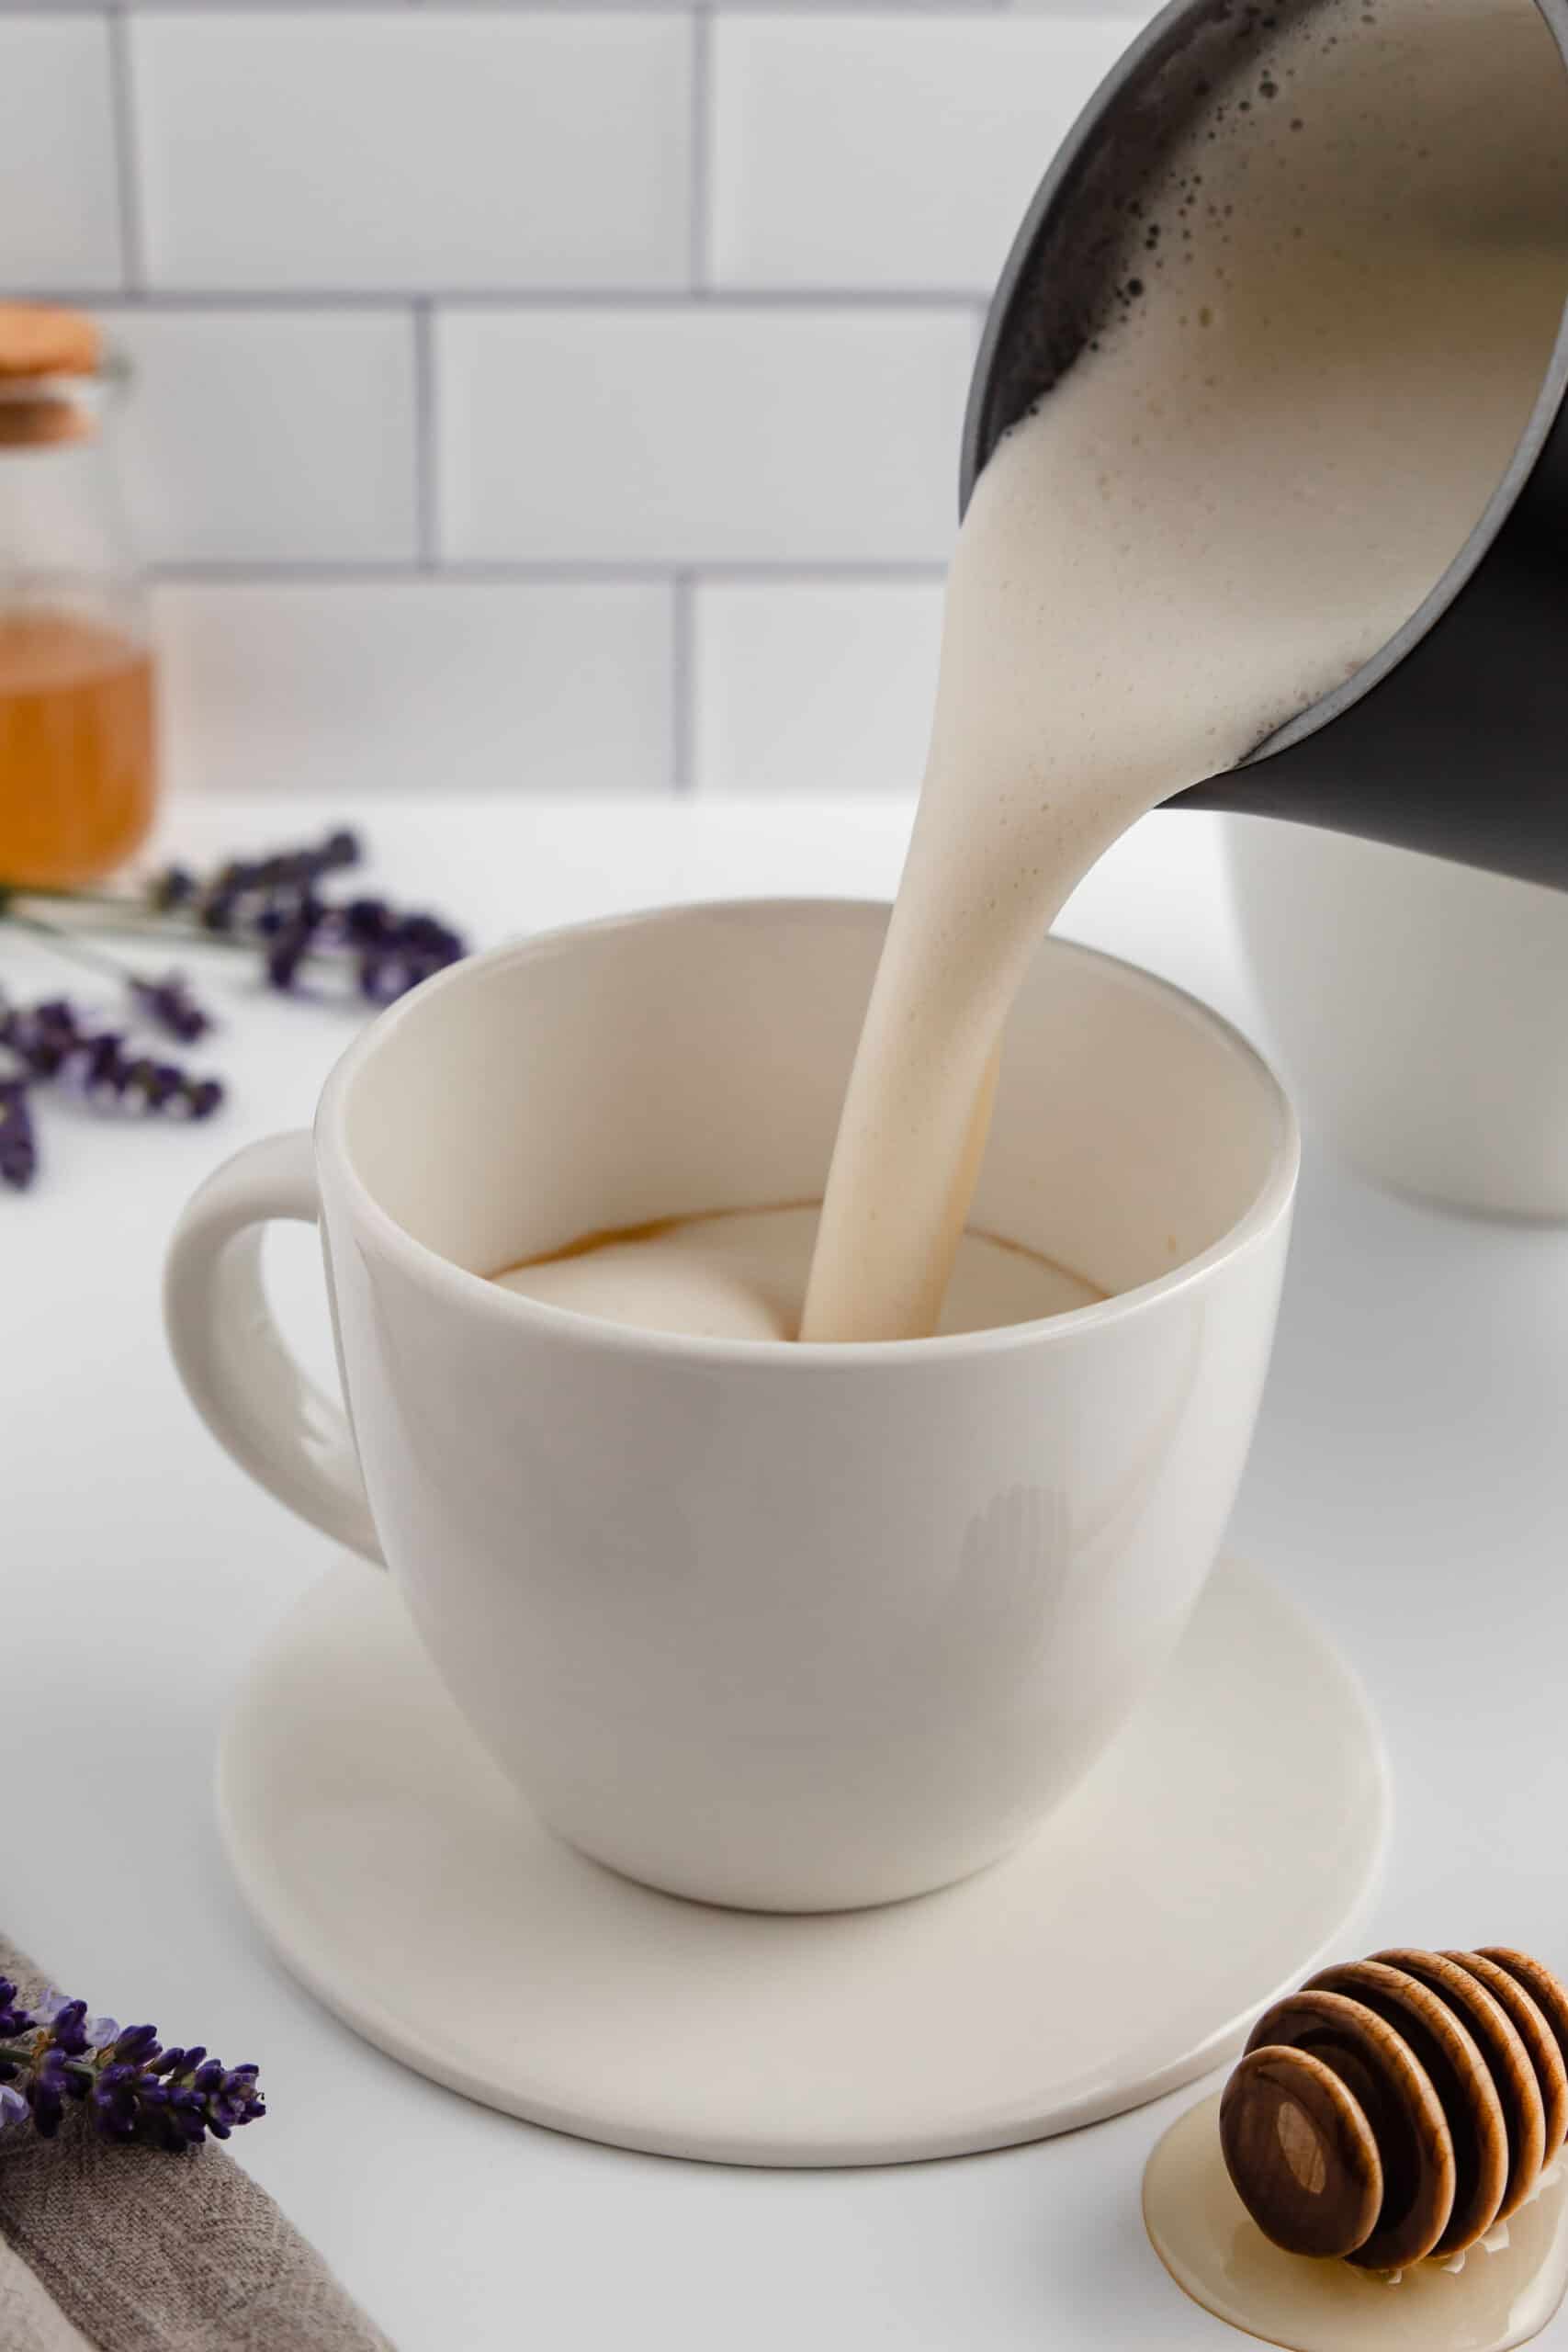 Pouring frothed milk into a white coffee mug.